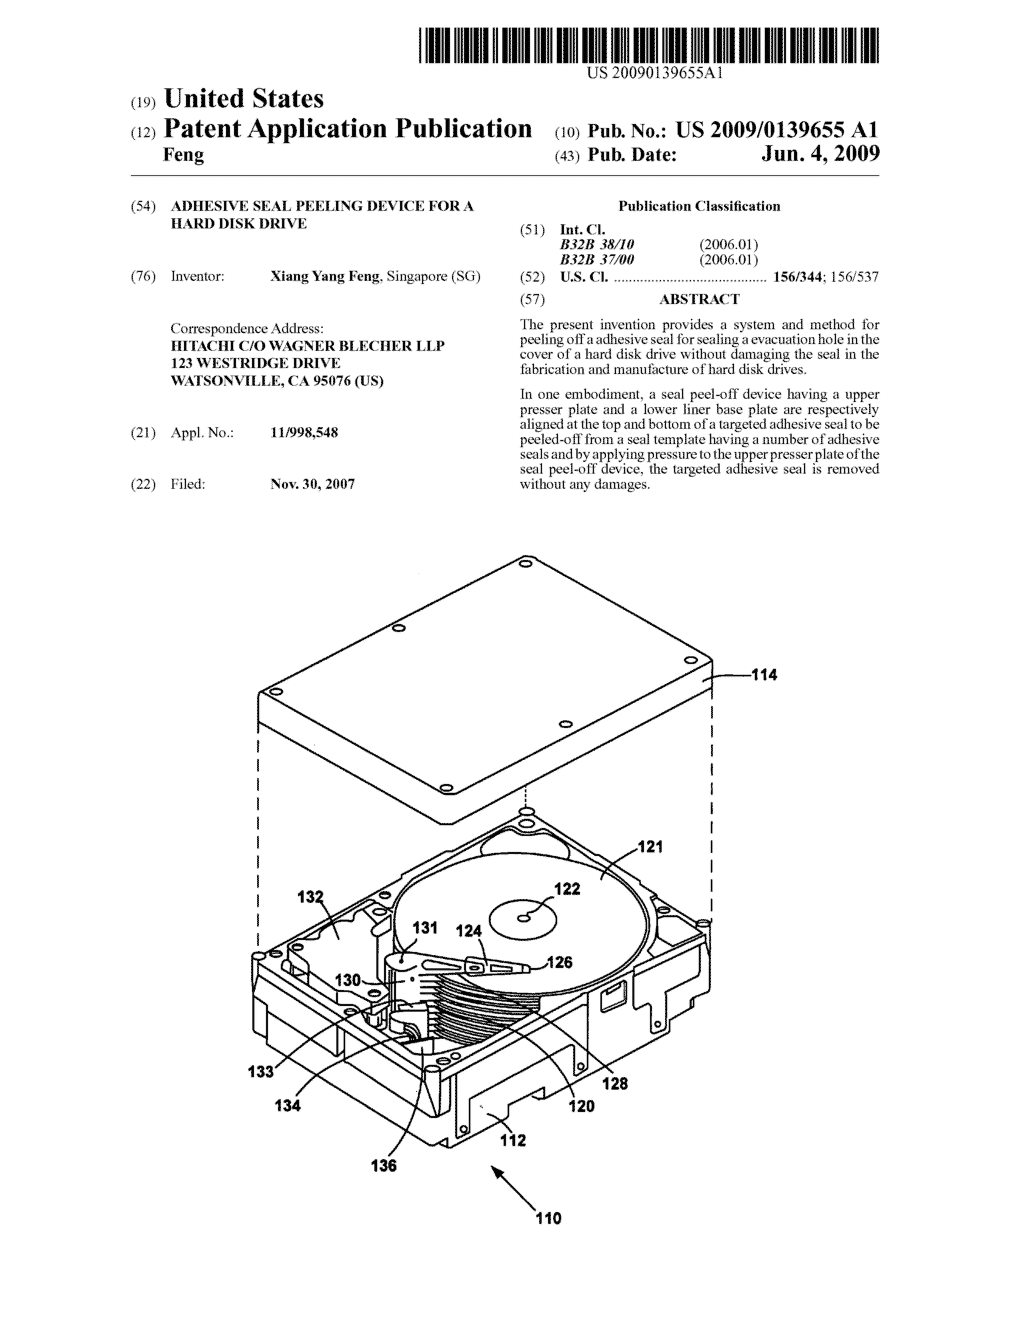 Adhesive seal peeling device for a hard disk drive - diagram, schematic, and image 01